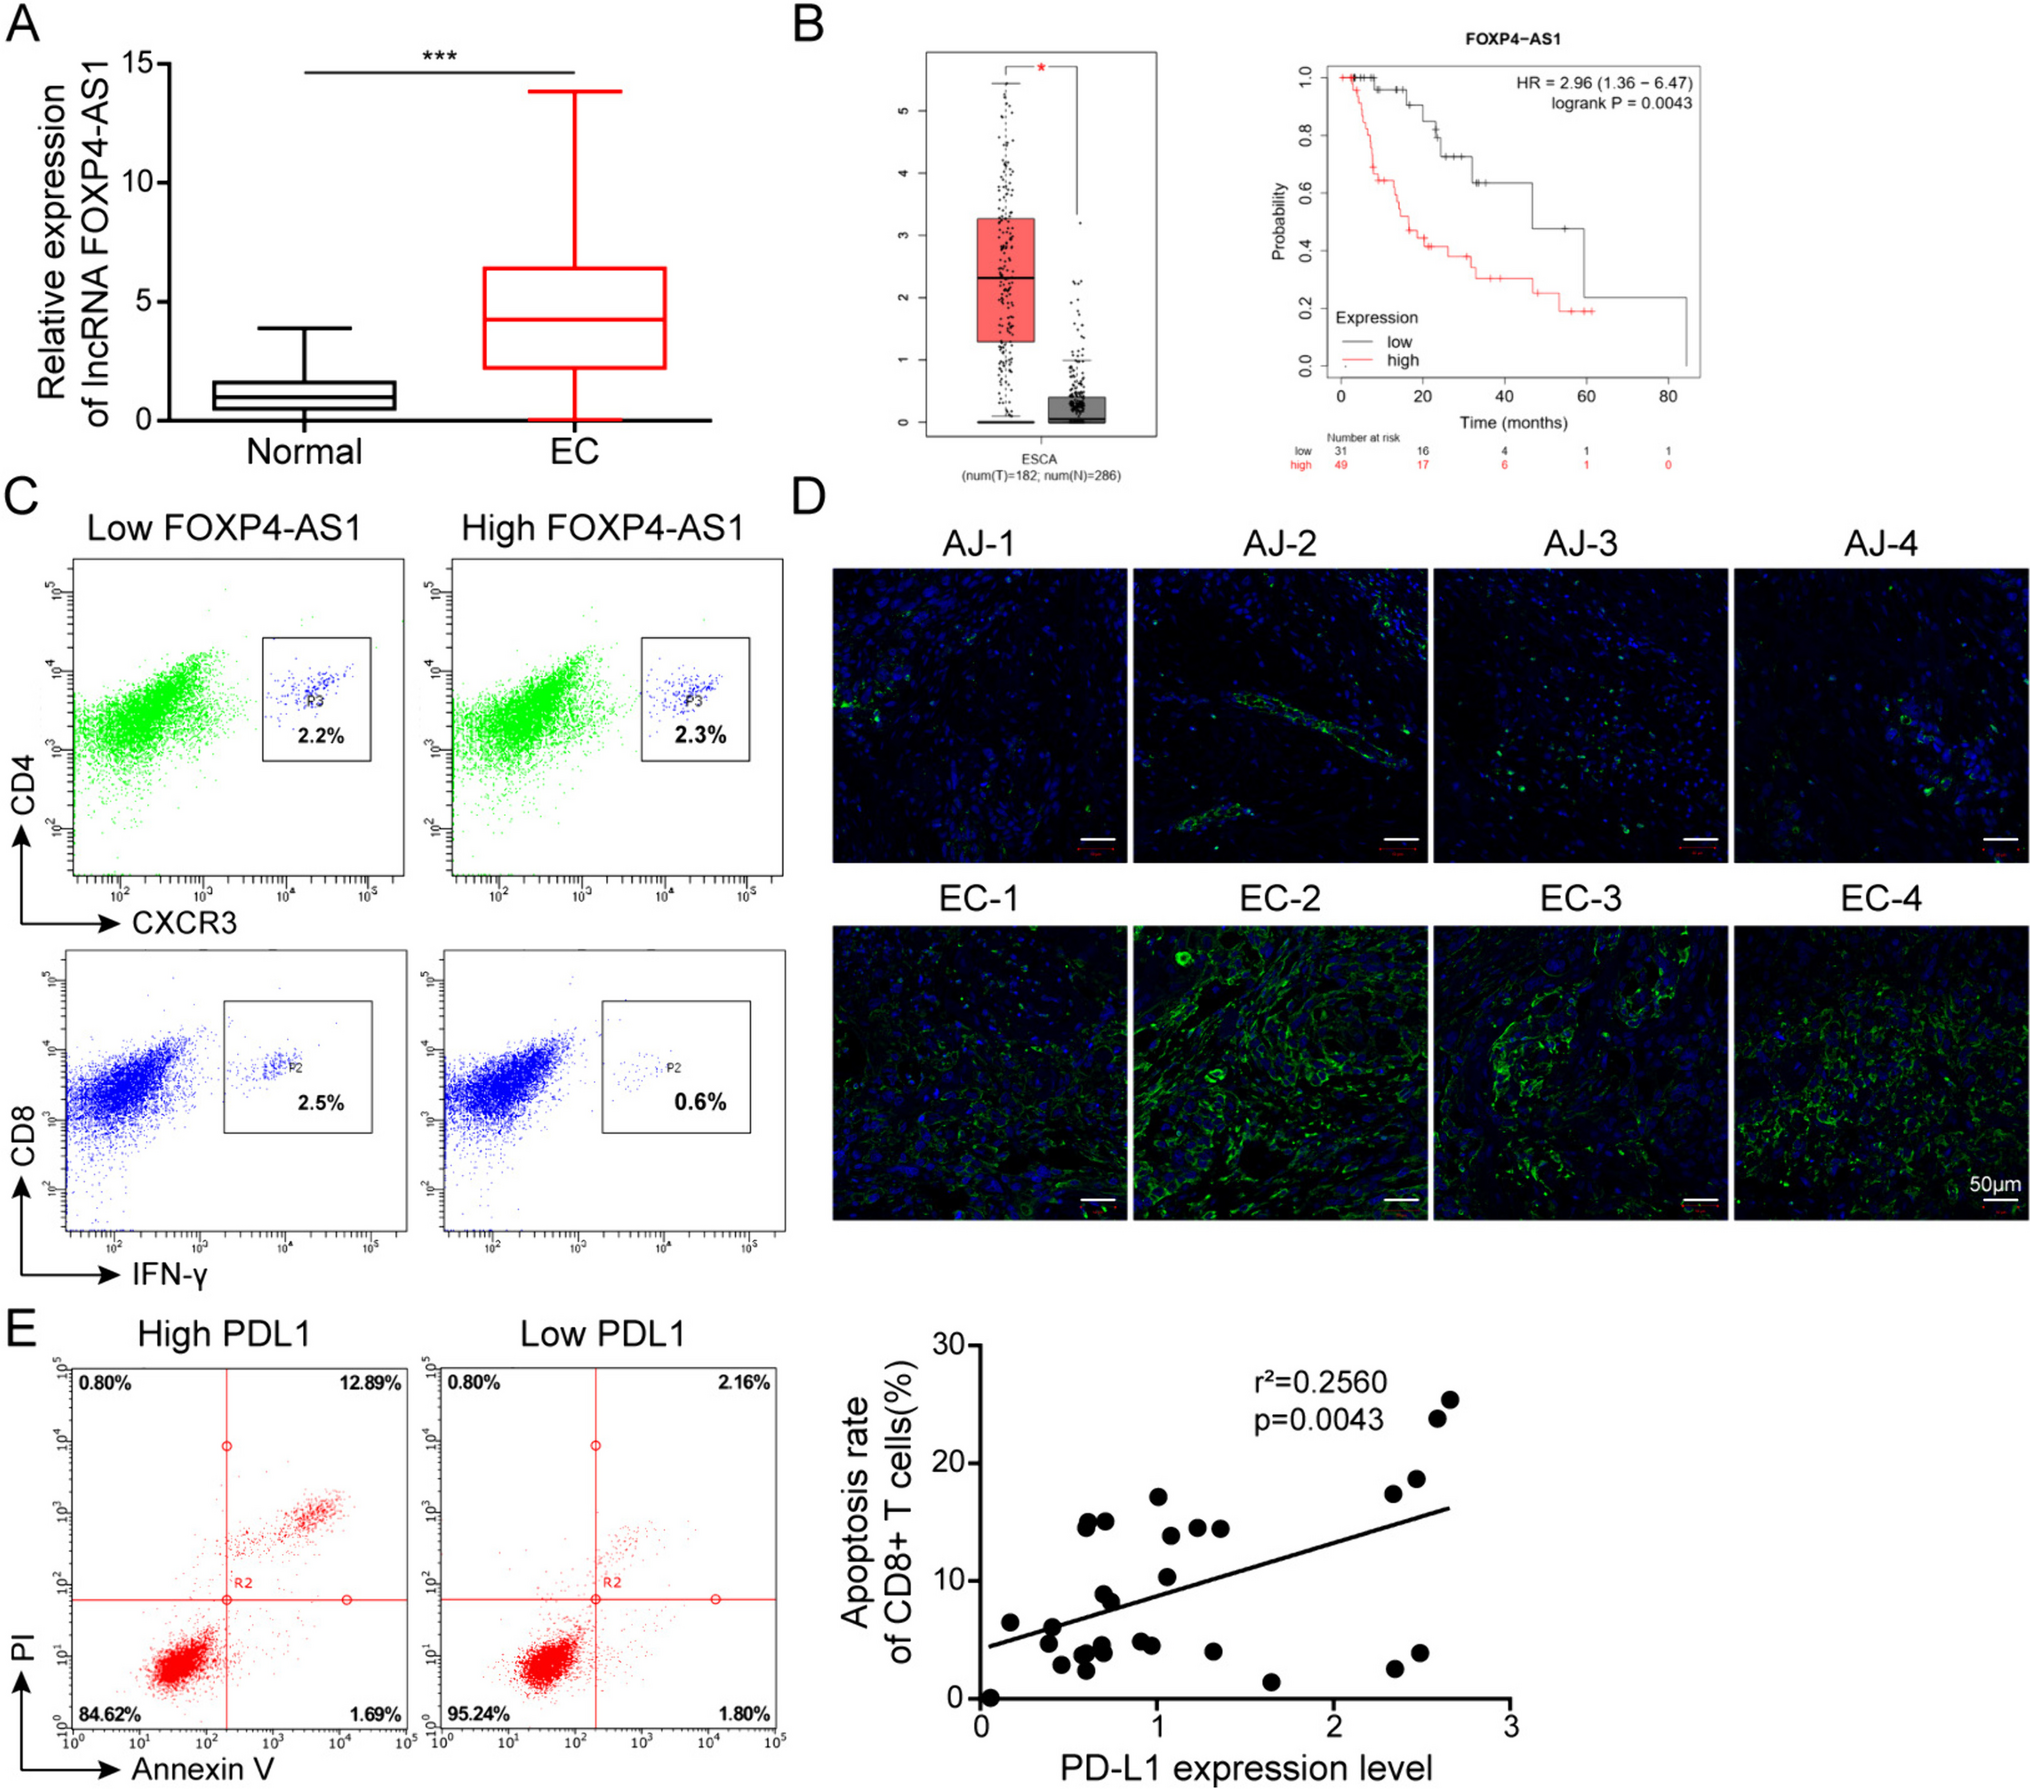 FOXP4-AS1 promotes CD8+ T cell exhaustion and esophageal cancer immune escape through USP10-stabilized PD-L1